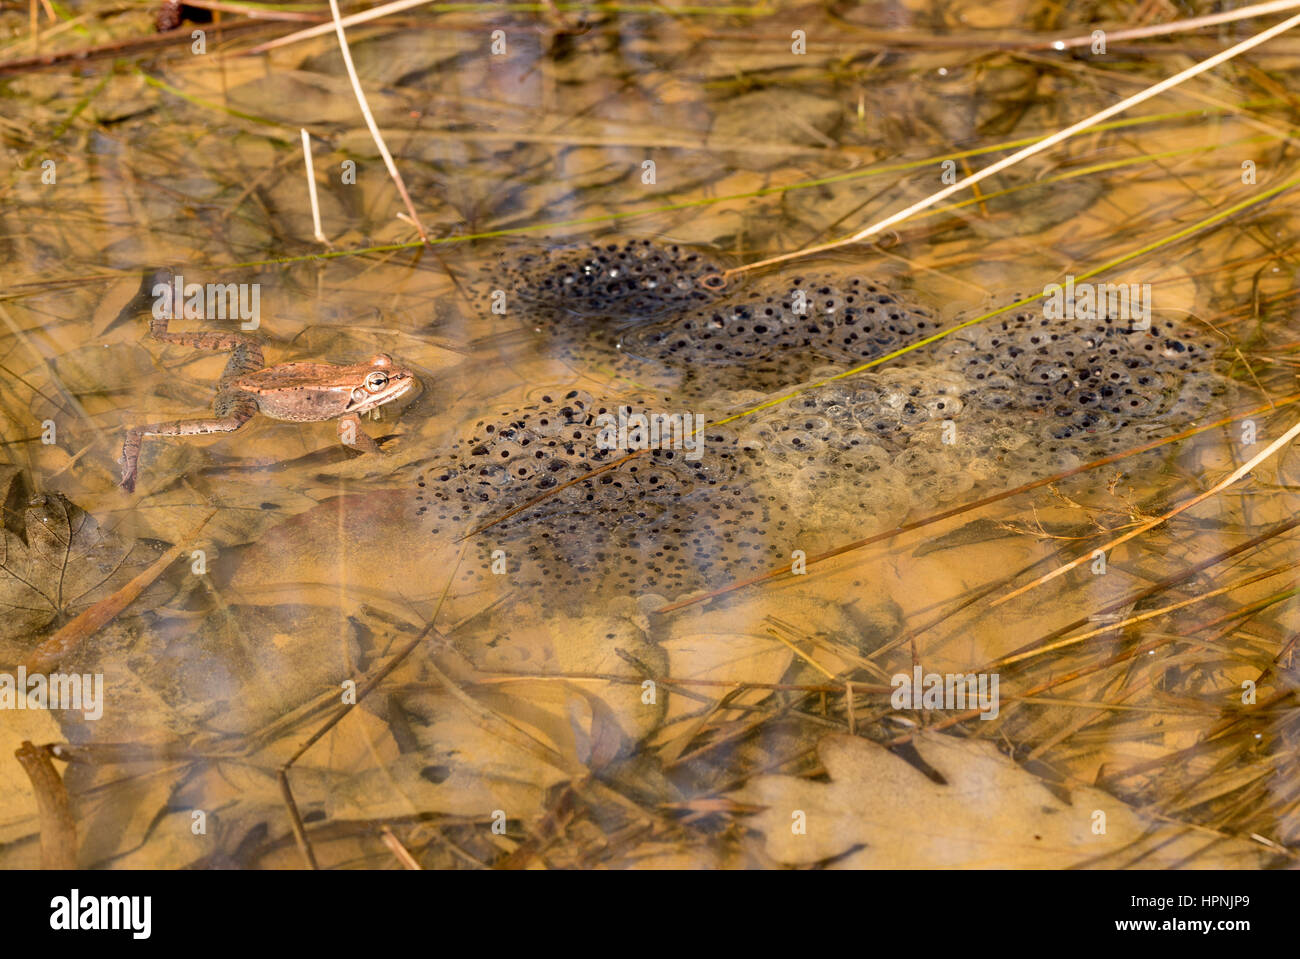 Single frog or toad floating in pond with clumps of eggs or frogspawn in the water in spring Stock Photo